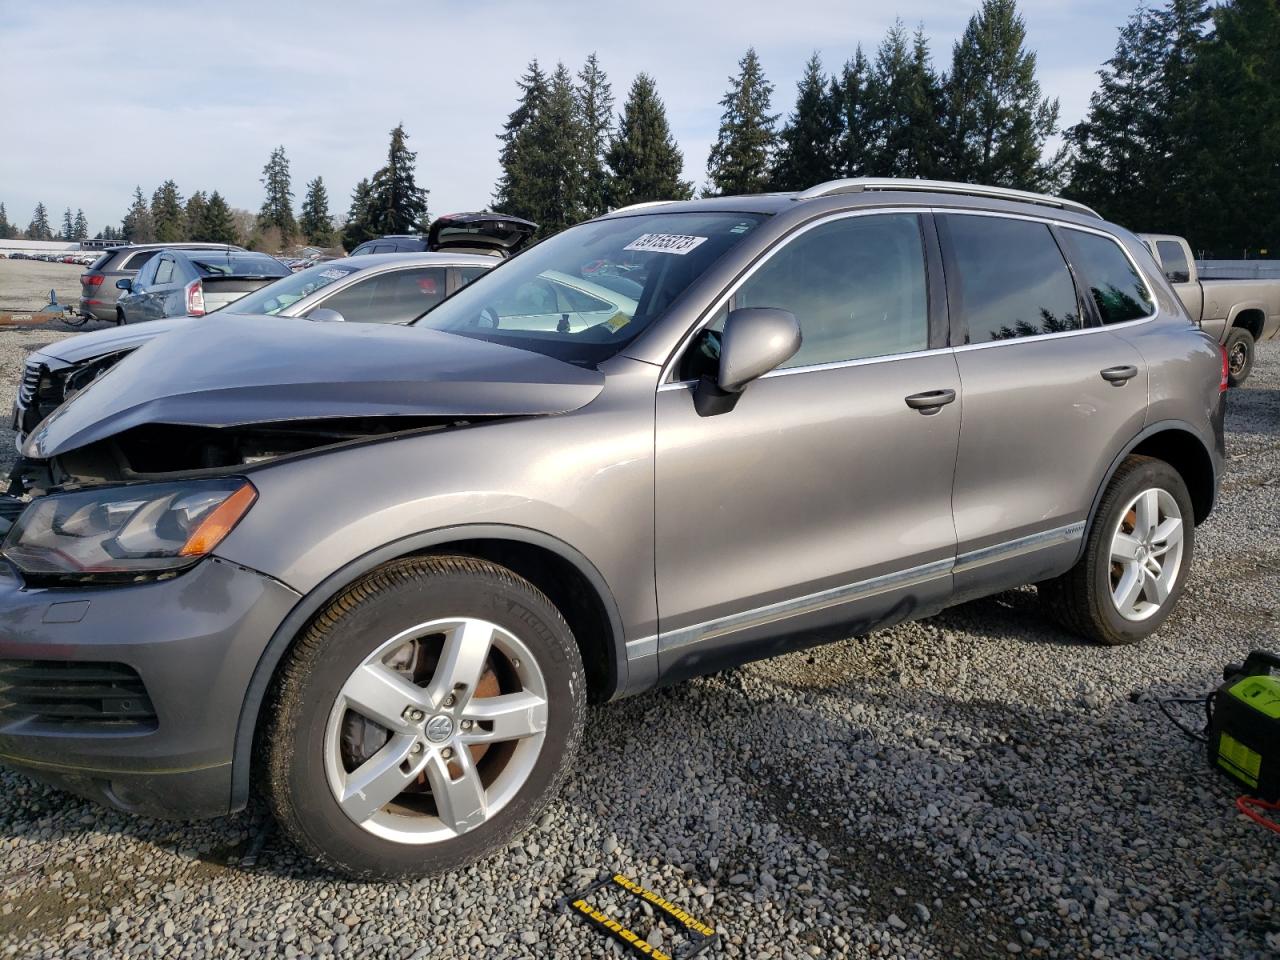 2012 Volkswagen Touareg Hybrid for sale at Copart Graham, WA Lot #39155***  | SalvageReseller.com